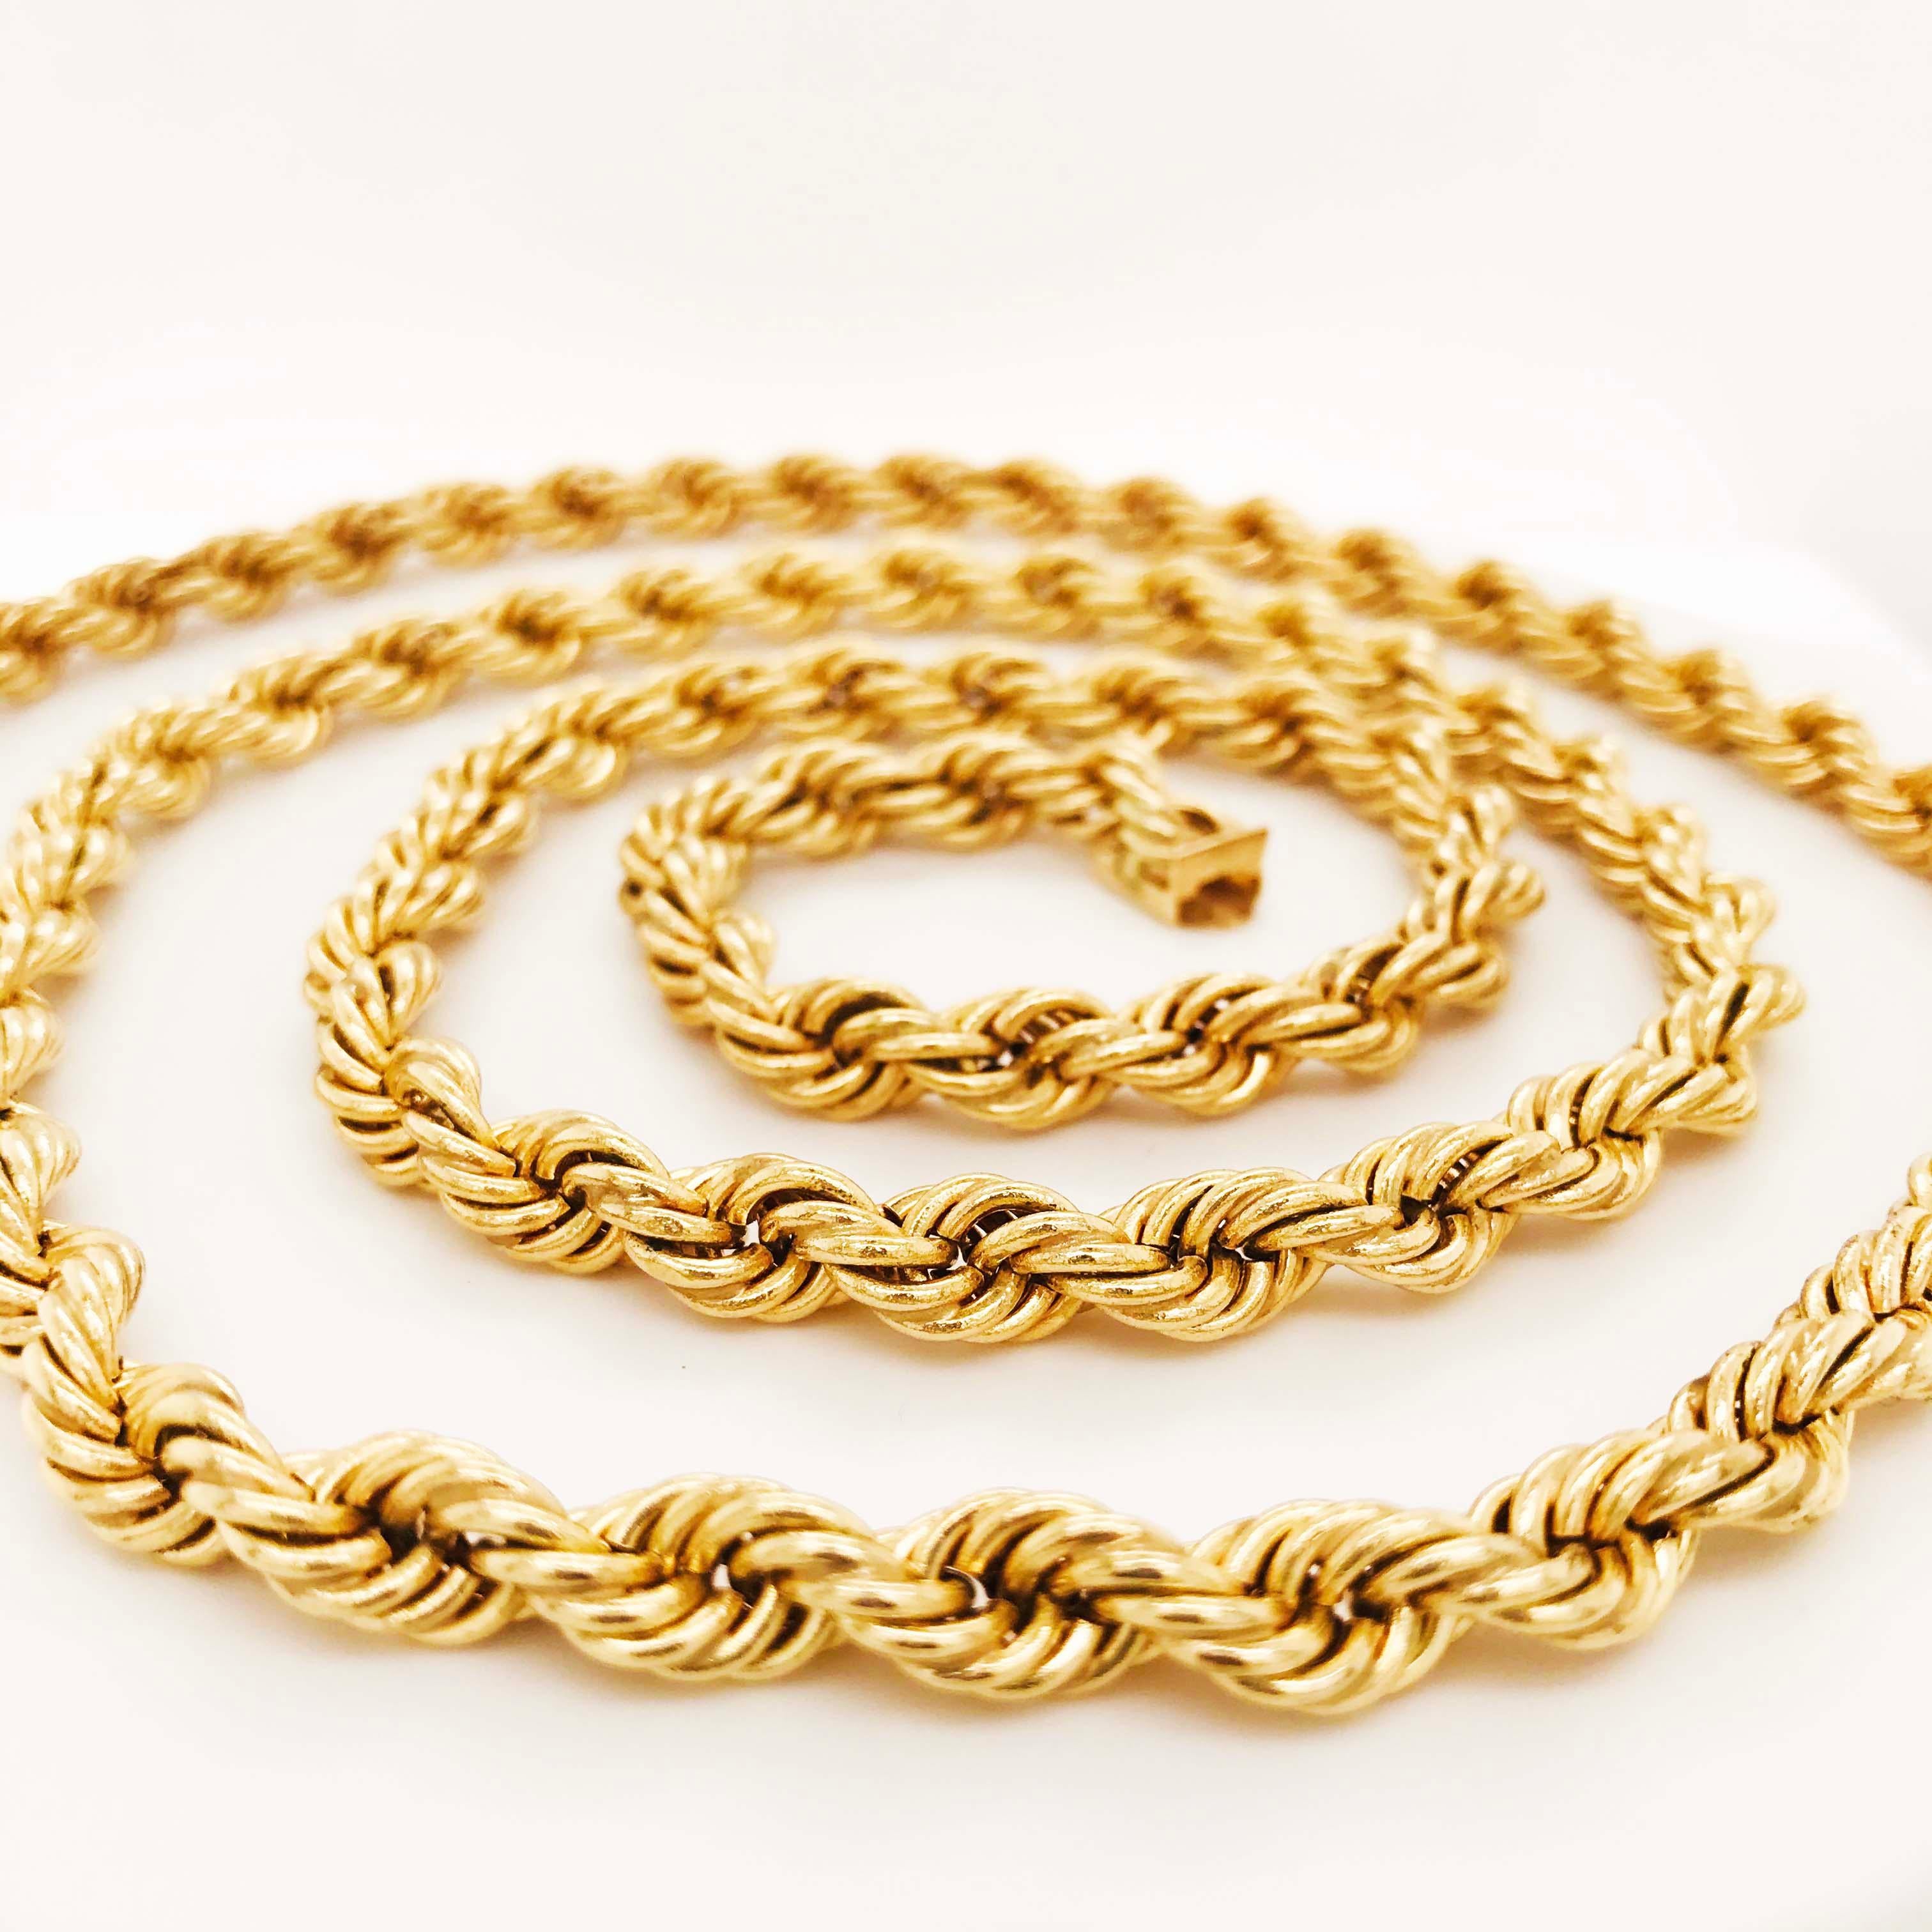 Large Rope Chain Necklace, 14 Karat Yellow Gold 7 mm Wide Rope Chain, Unisex  3